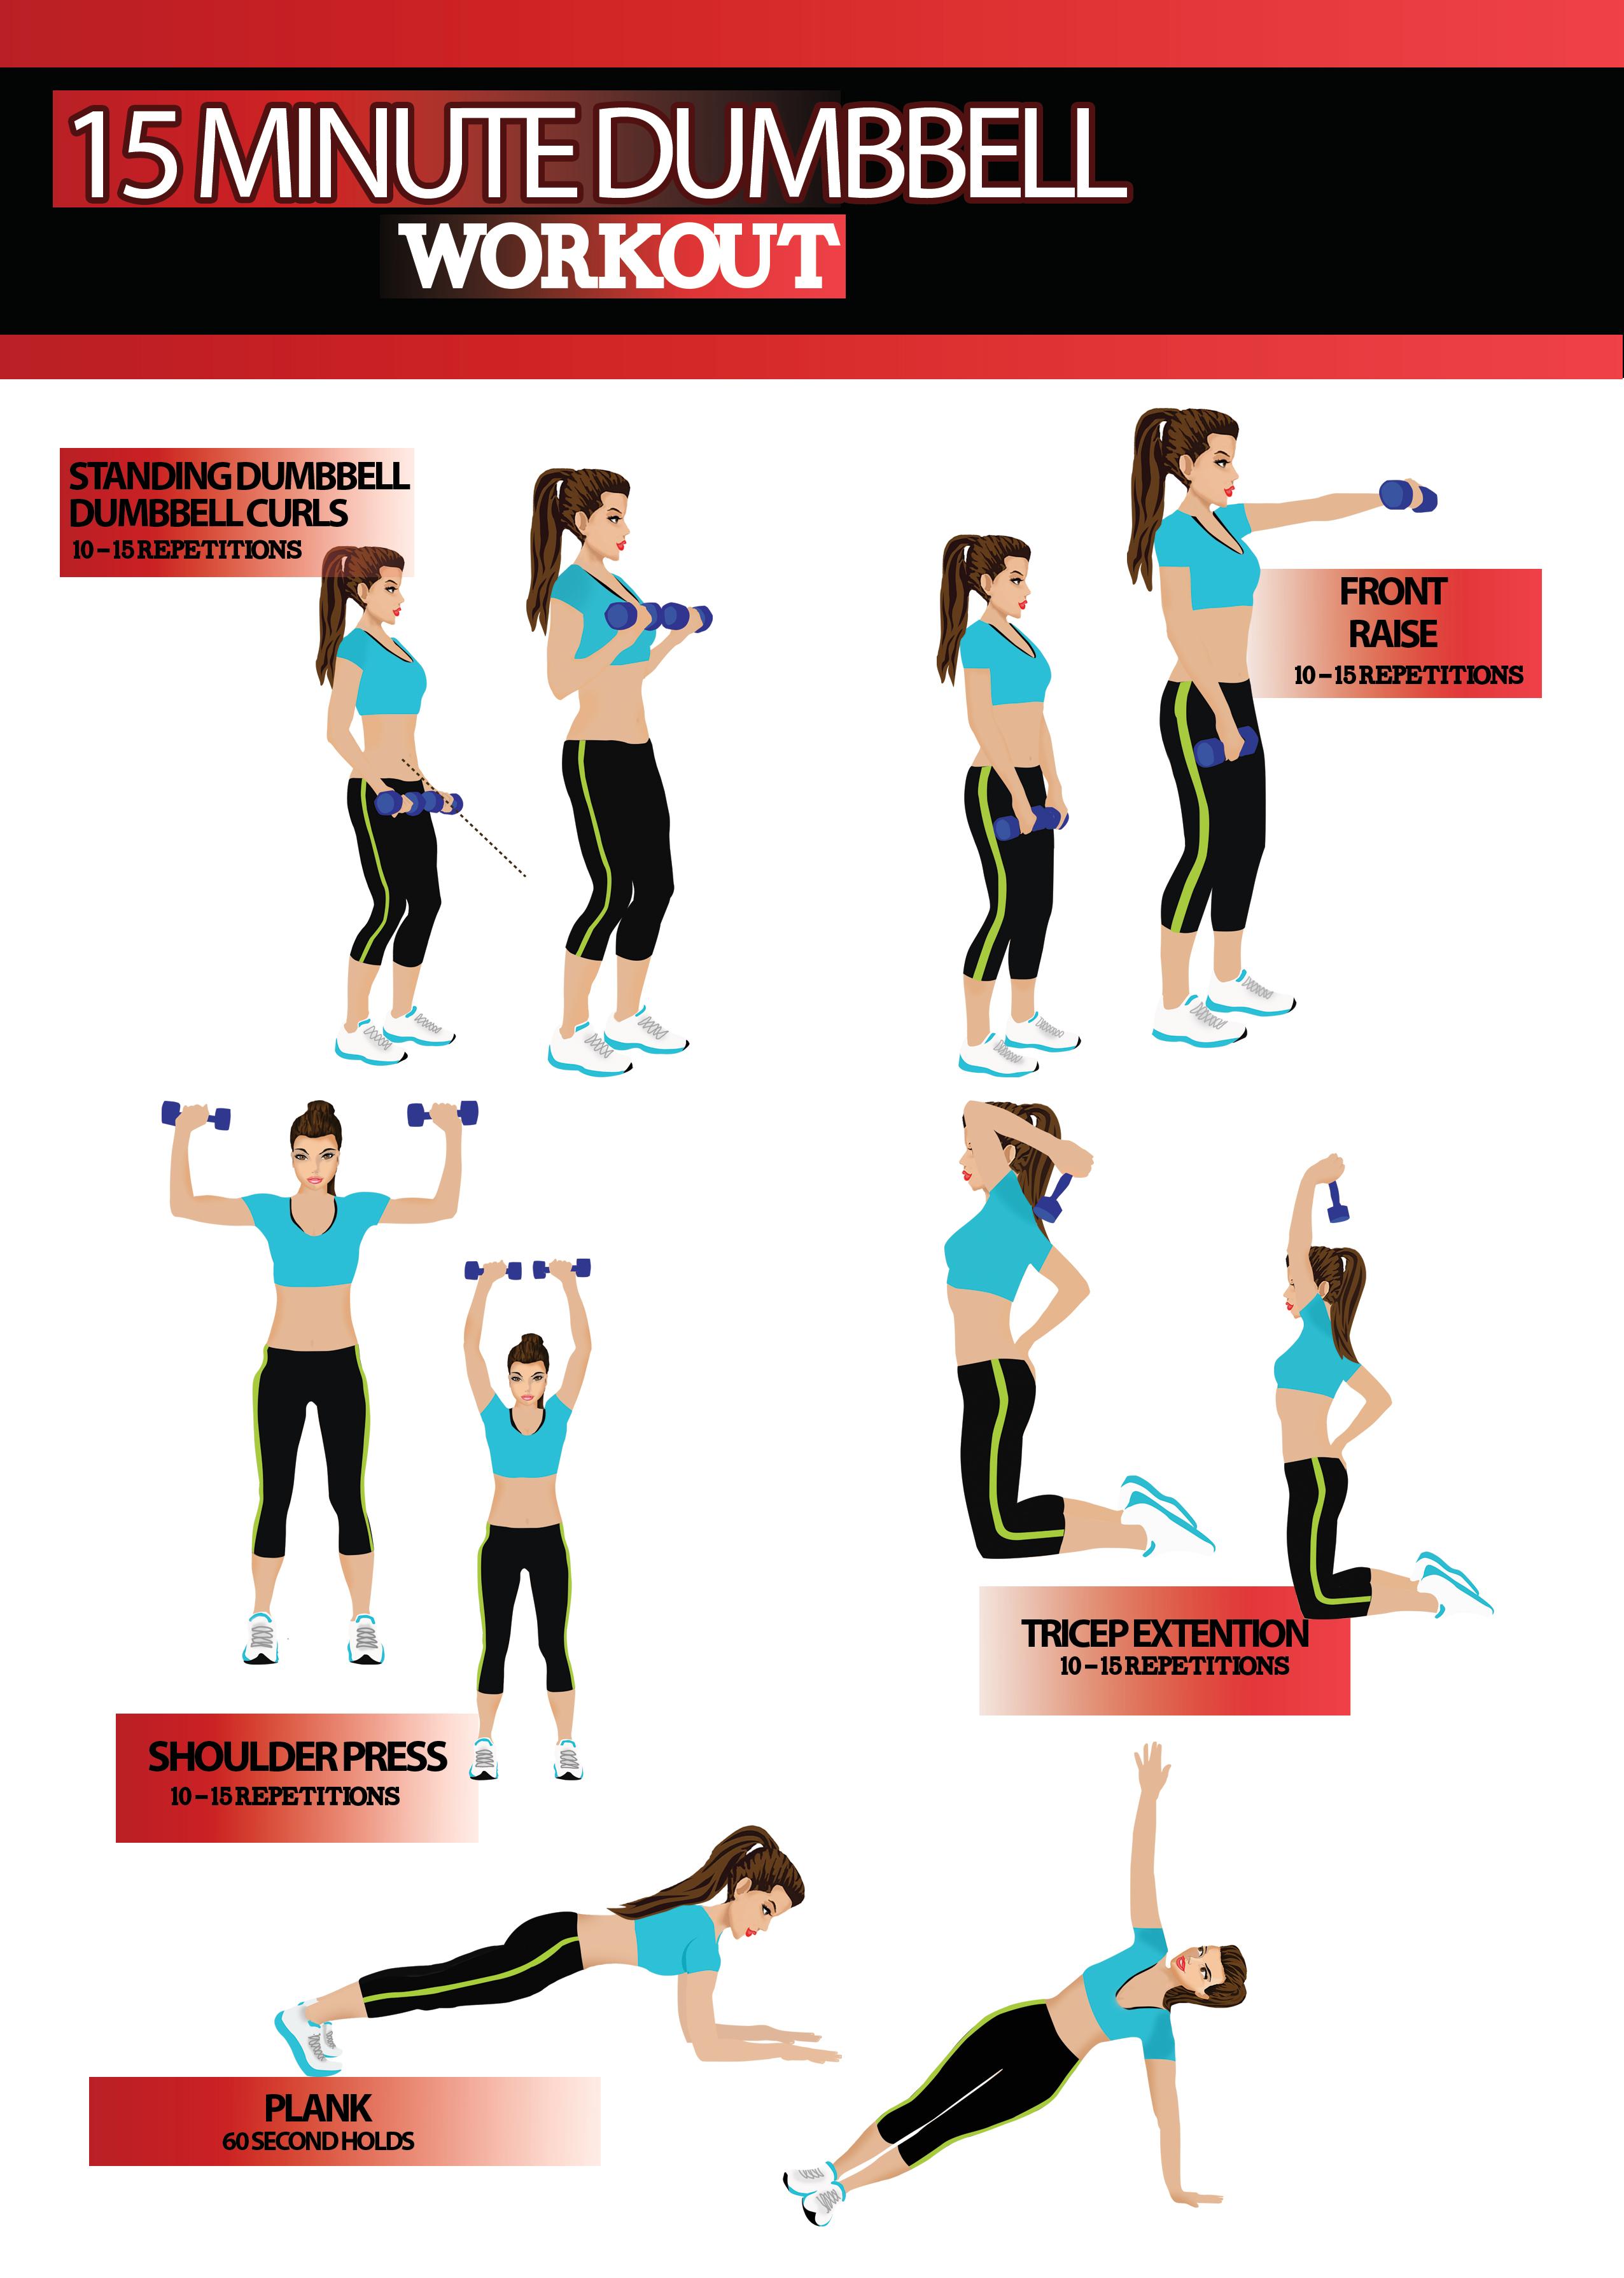 15 Minute Dumbell Workout Poster for Push Pull Legs